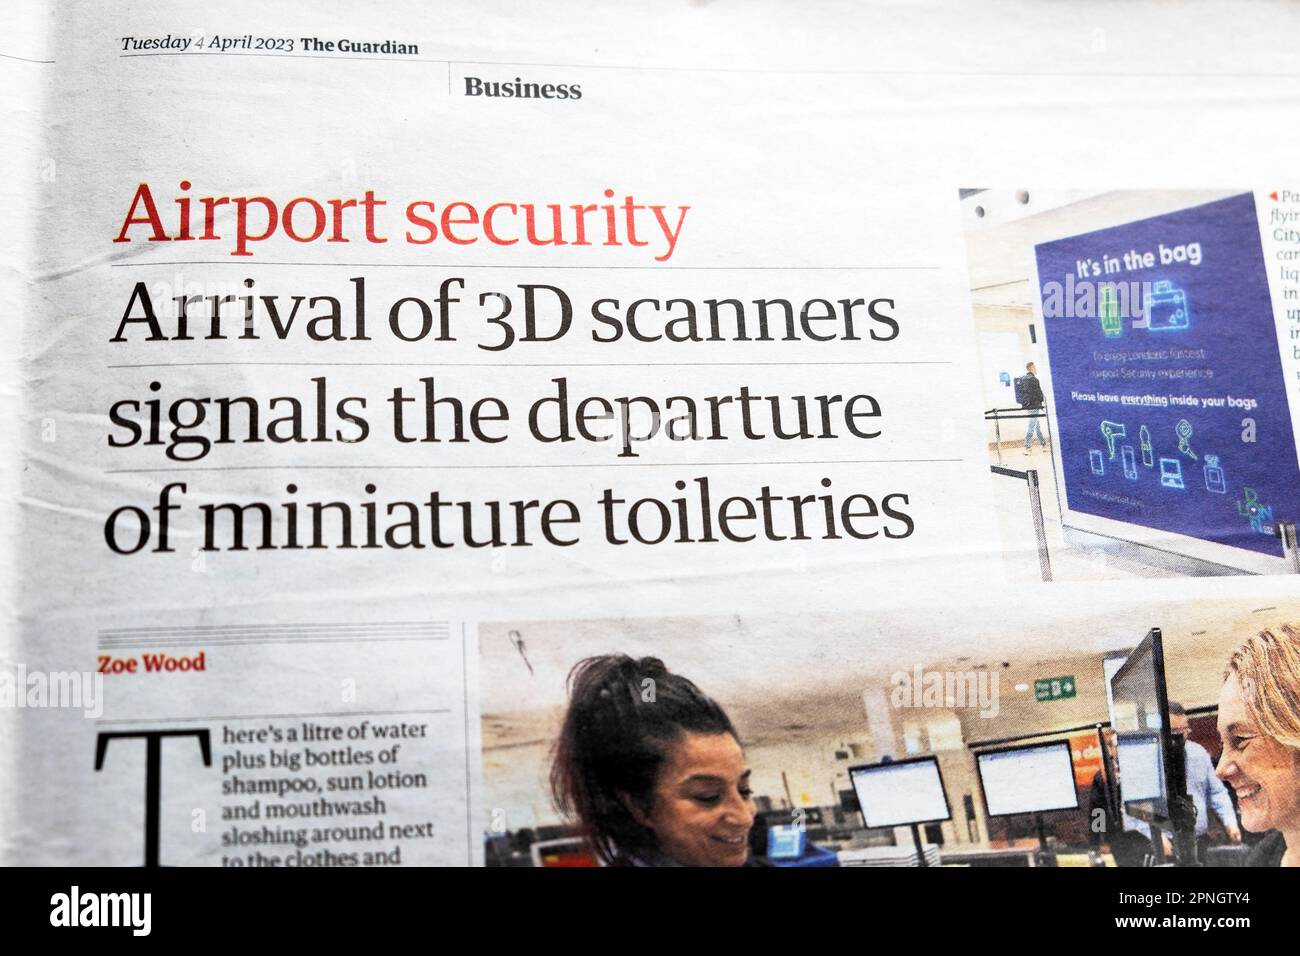 'Airport security Arrival of 3D scanners signals the departure of miniature toiletries' Guardian newspaper headline liquids article  5 April 2023 UK Stock Photo